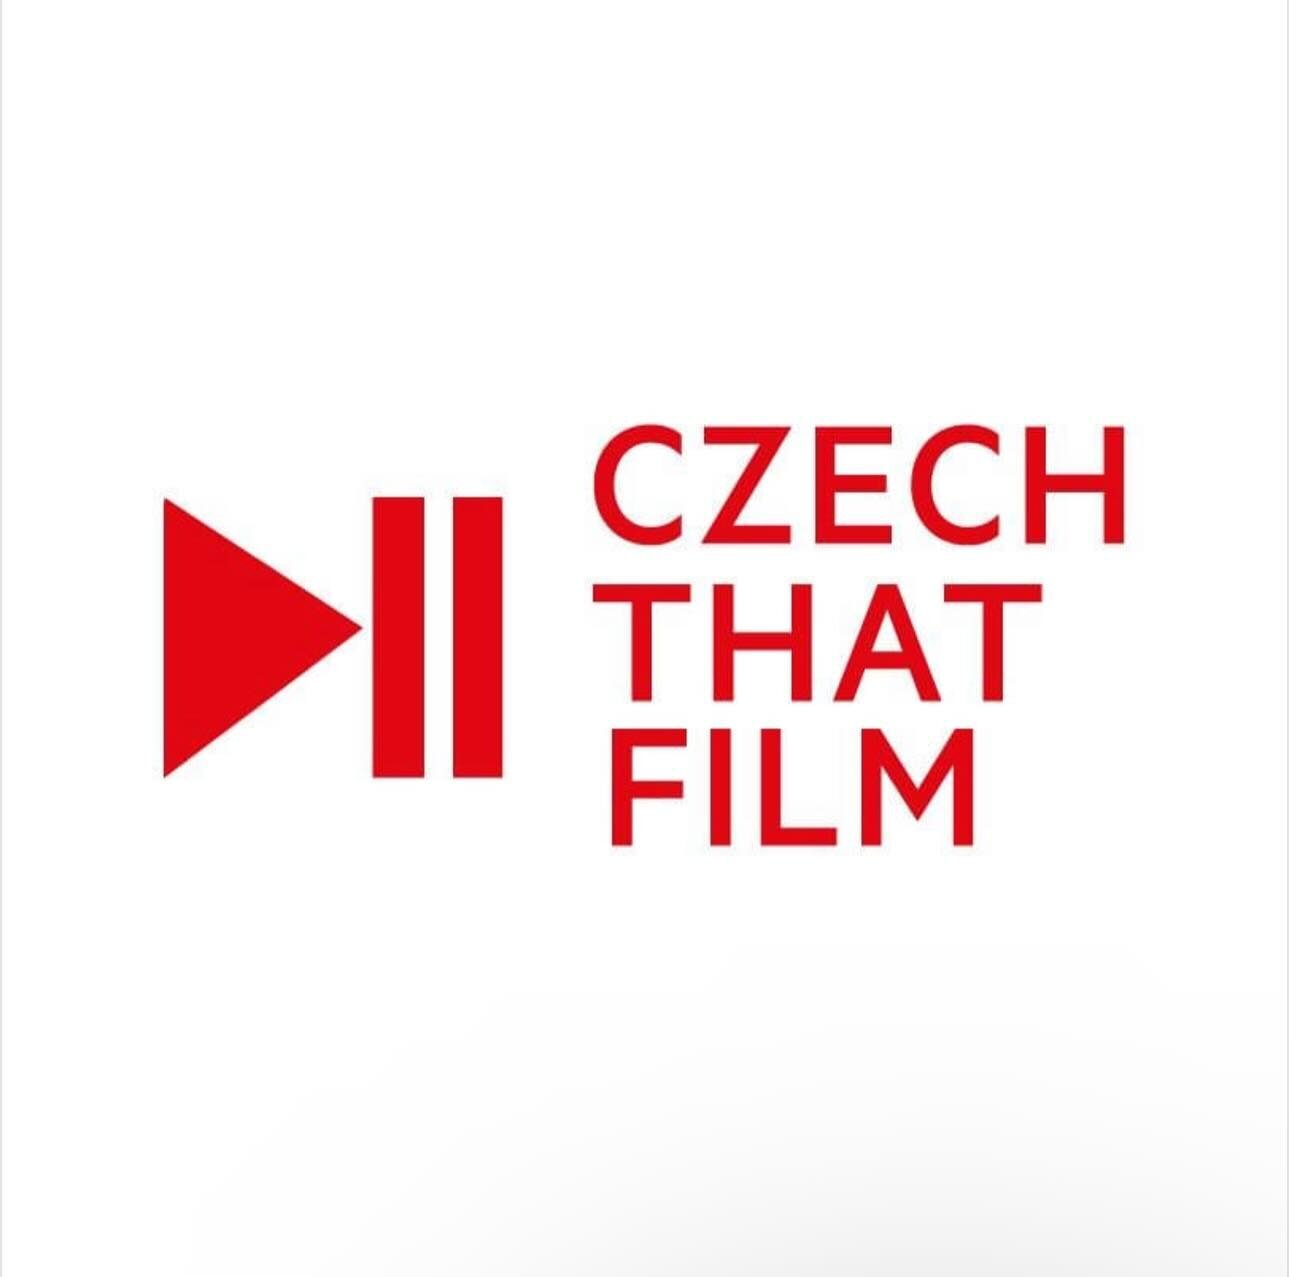 RETURNING TO SALT LAKE CITY IN 2024!
Get ready Czech and Slovak friends in Utah! Czech films will be returning to the Salt Lake Film Society's Broadway Centre Cinemas in March 2024 with a powerful lineup of Czech films. Can't wait!

#saltlakecity